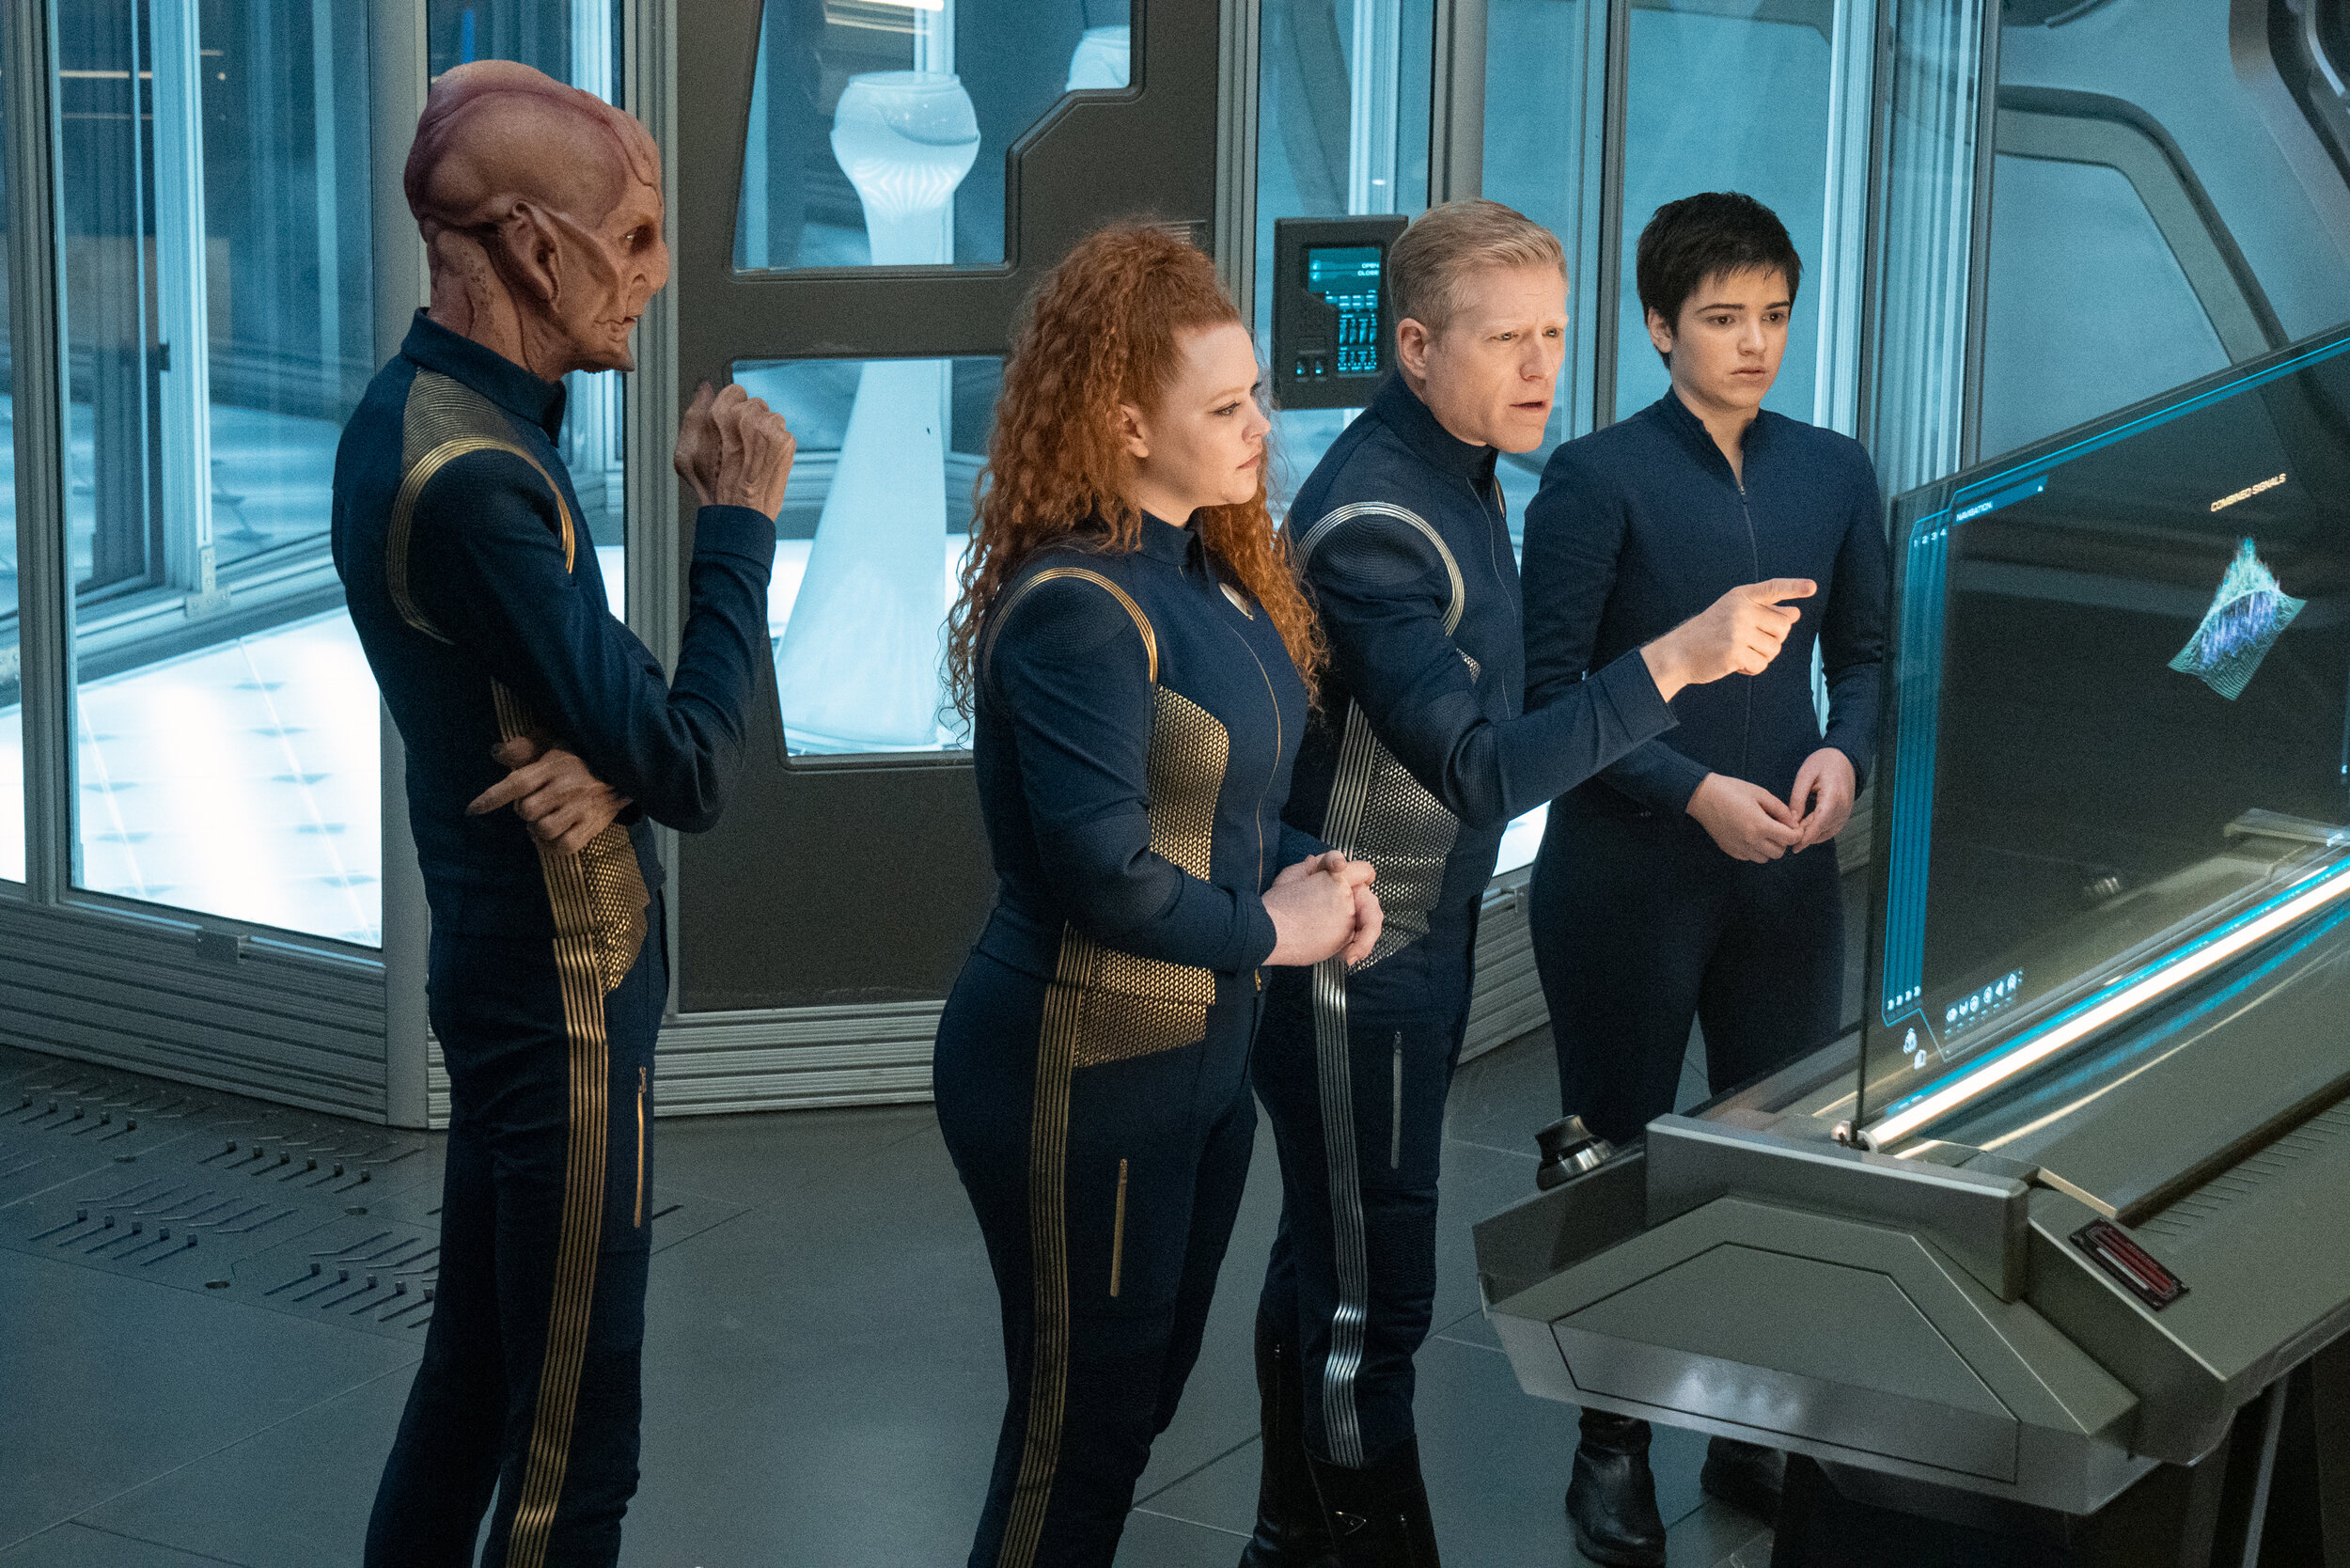   "Terra Firma, Part 1" -- Ep#309 -- Pictured (L-R): Doug Jones as Capt. Saru, Mary Wiseman as Ensign Sylvia Tilly, Anthony Rapp as Lt. Commander Paul Stamets and Blu del Barrio as Adira of the CBS All Access series STAR TREK: DISCOVERY. Photo Cr: Mi